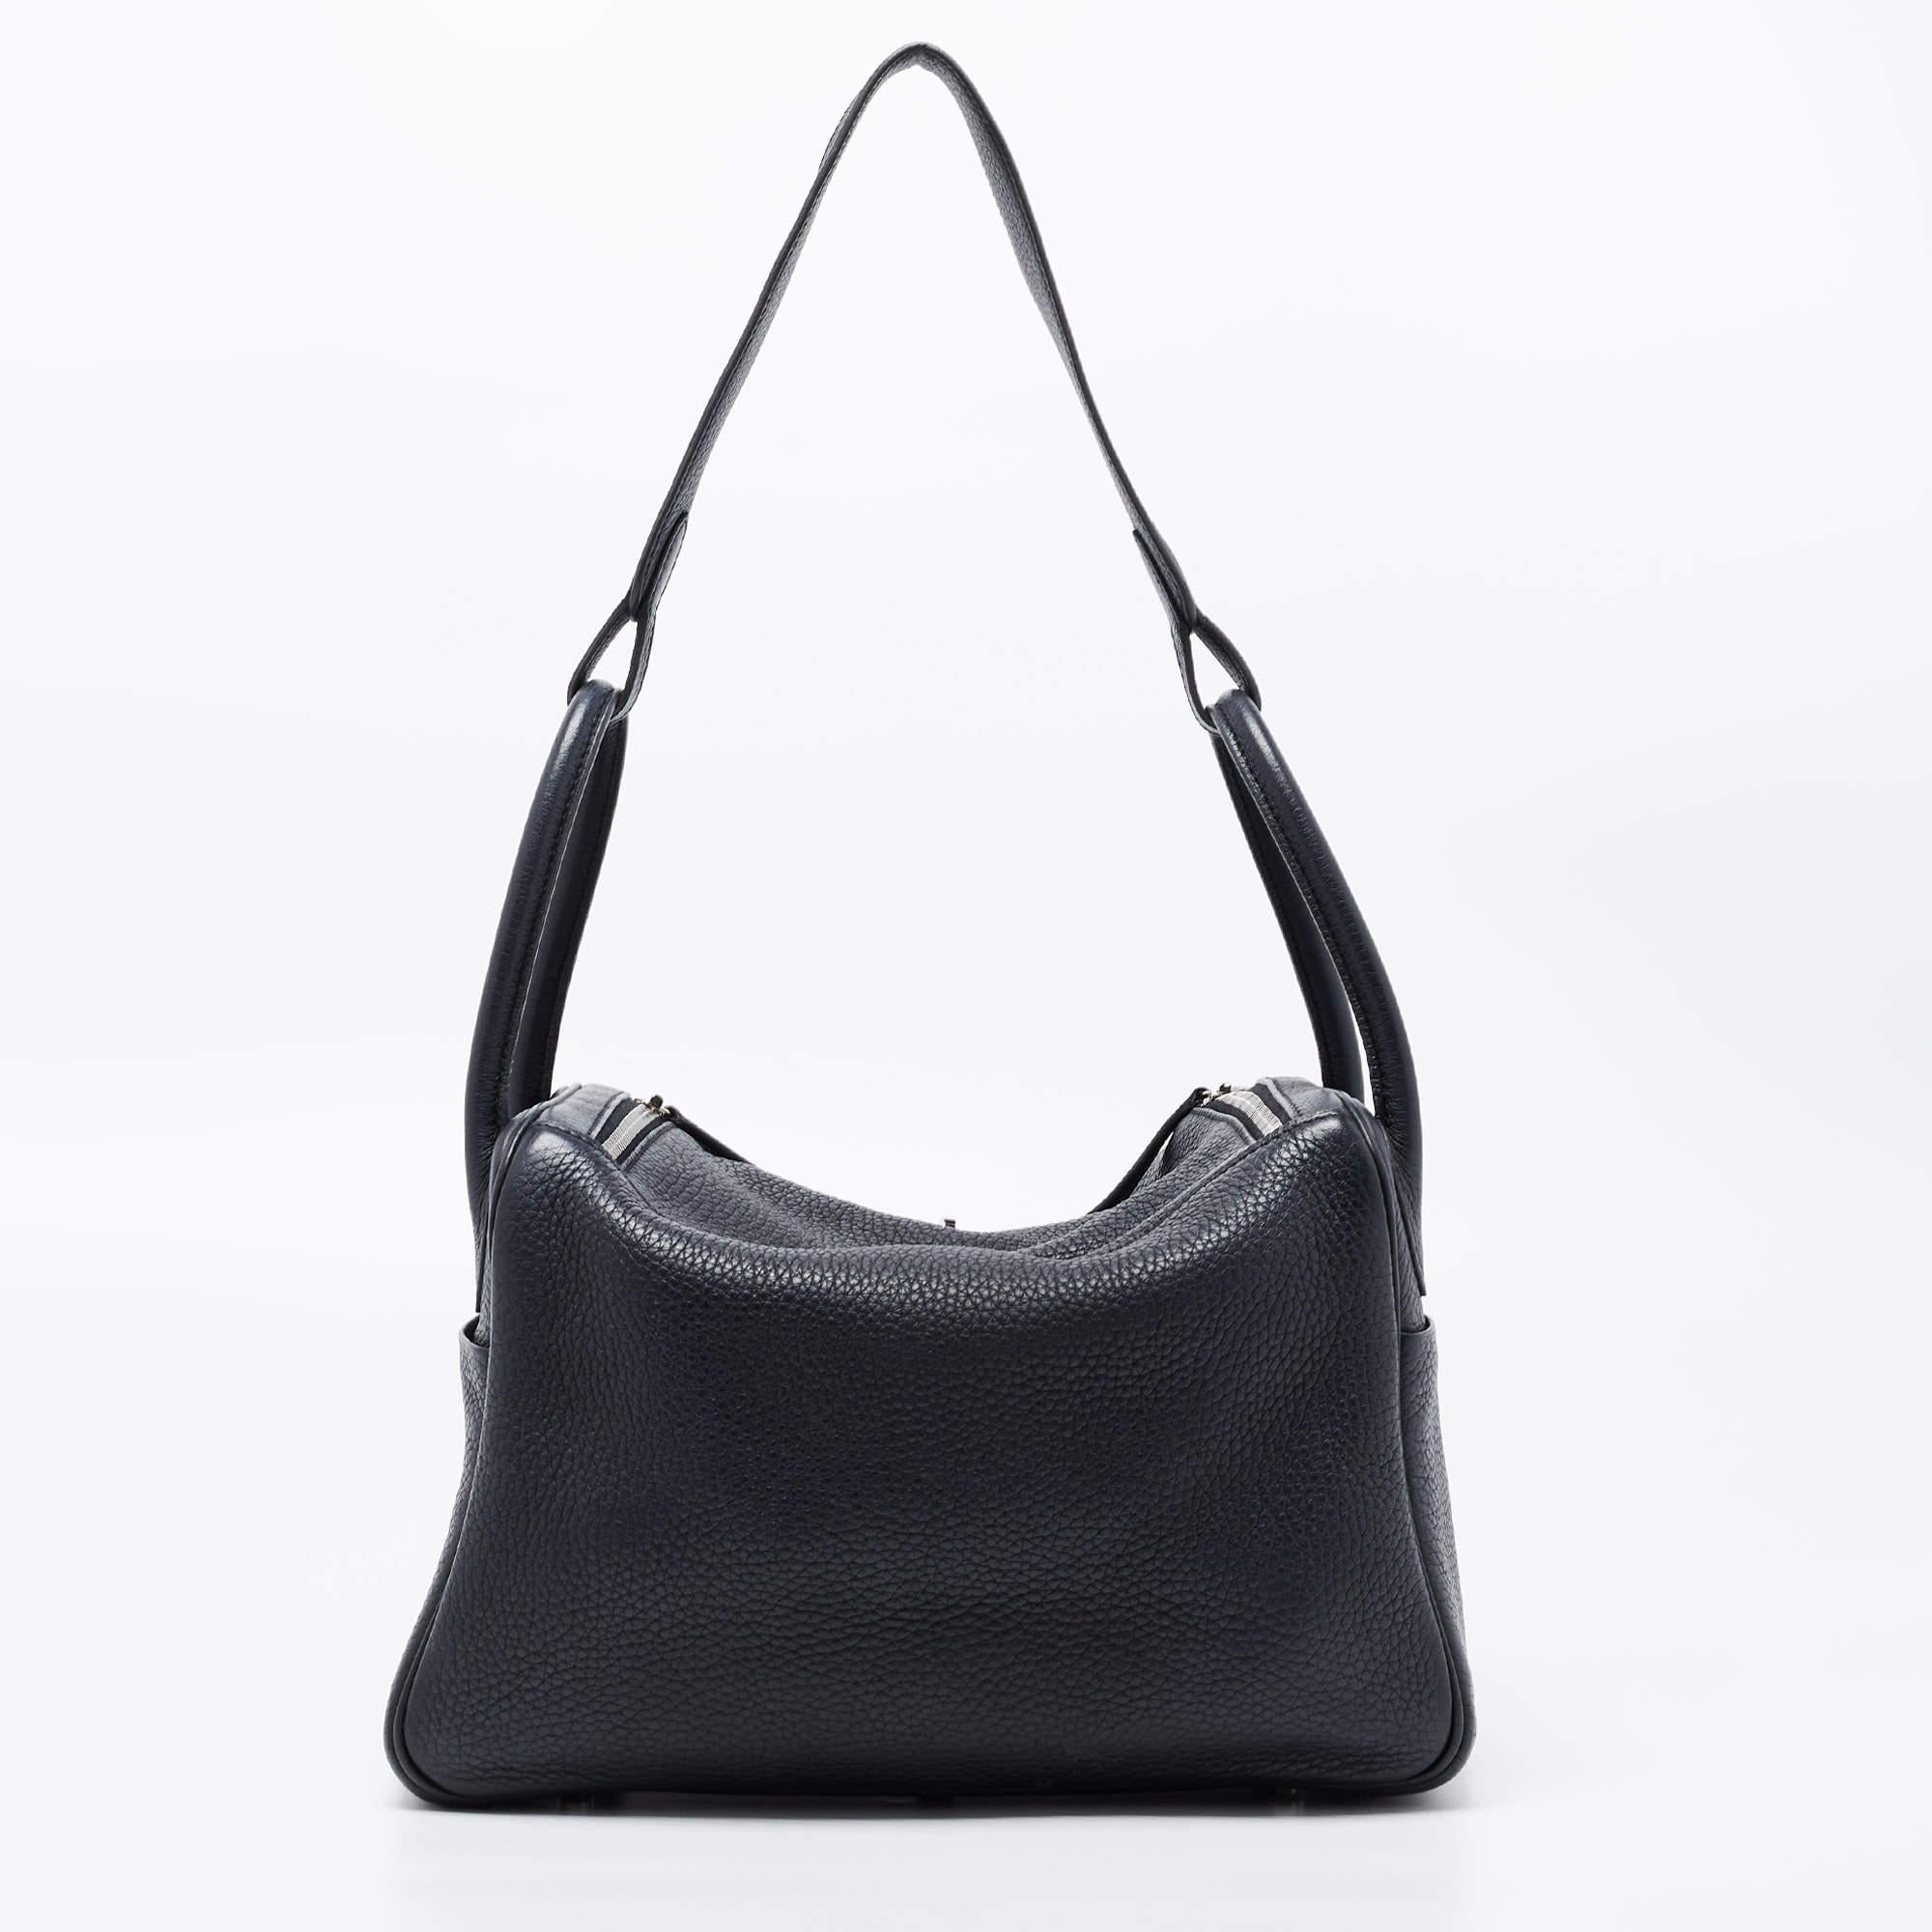 The Hermes Lindy was first designed in 2006, and it is recognized worldwide for its relaxed design. A creation of excellent craftsmanship, the Lindy sweetly embodies ladylike elegance! Exquisitely crafted from black Clemence leather, the bag has